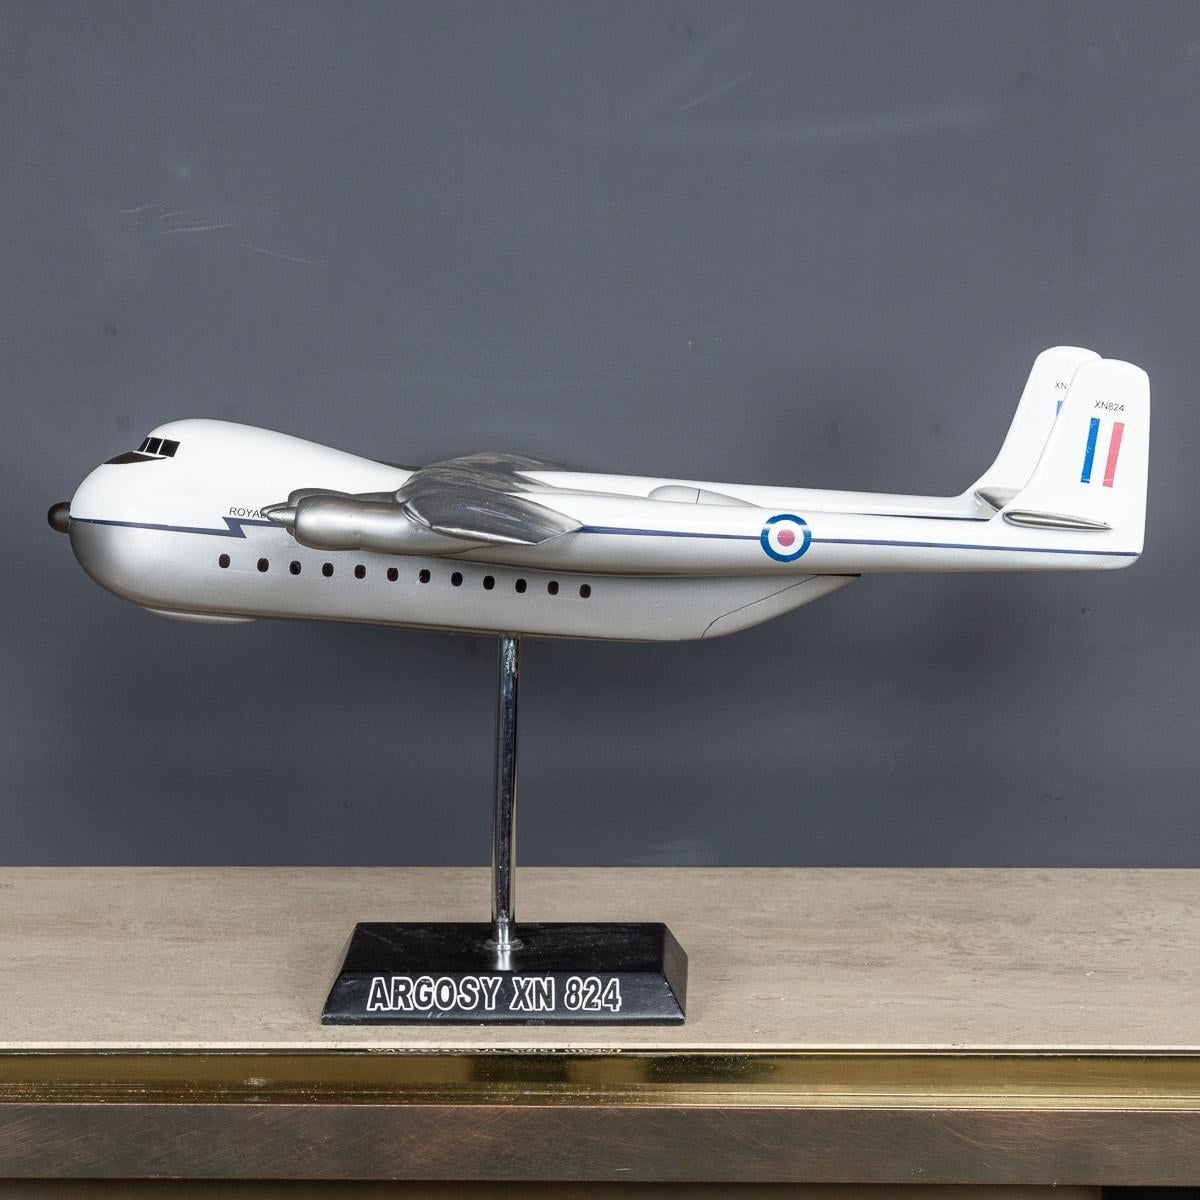 British Cast Model Of The Armstrong Whitworth Argosy Xn 824 Transport Plane c.1960 For Sale